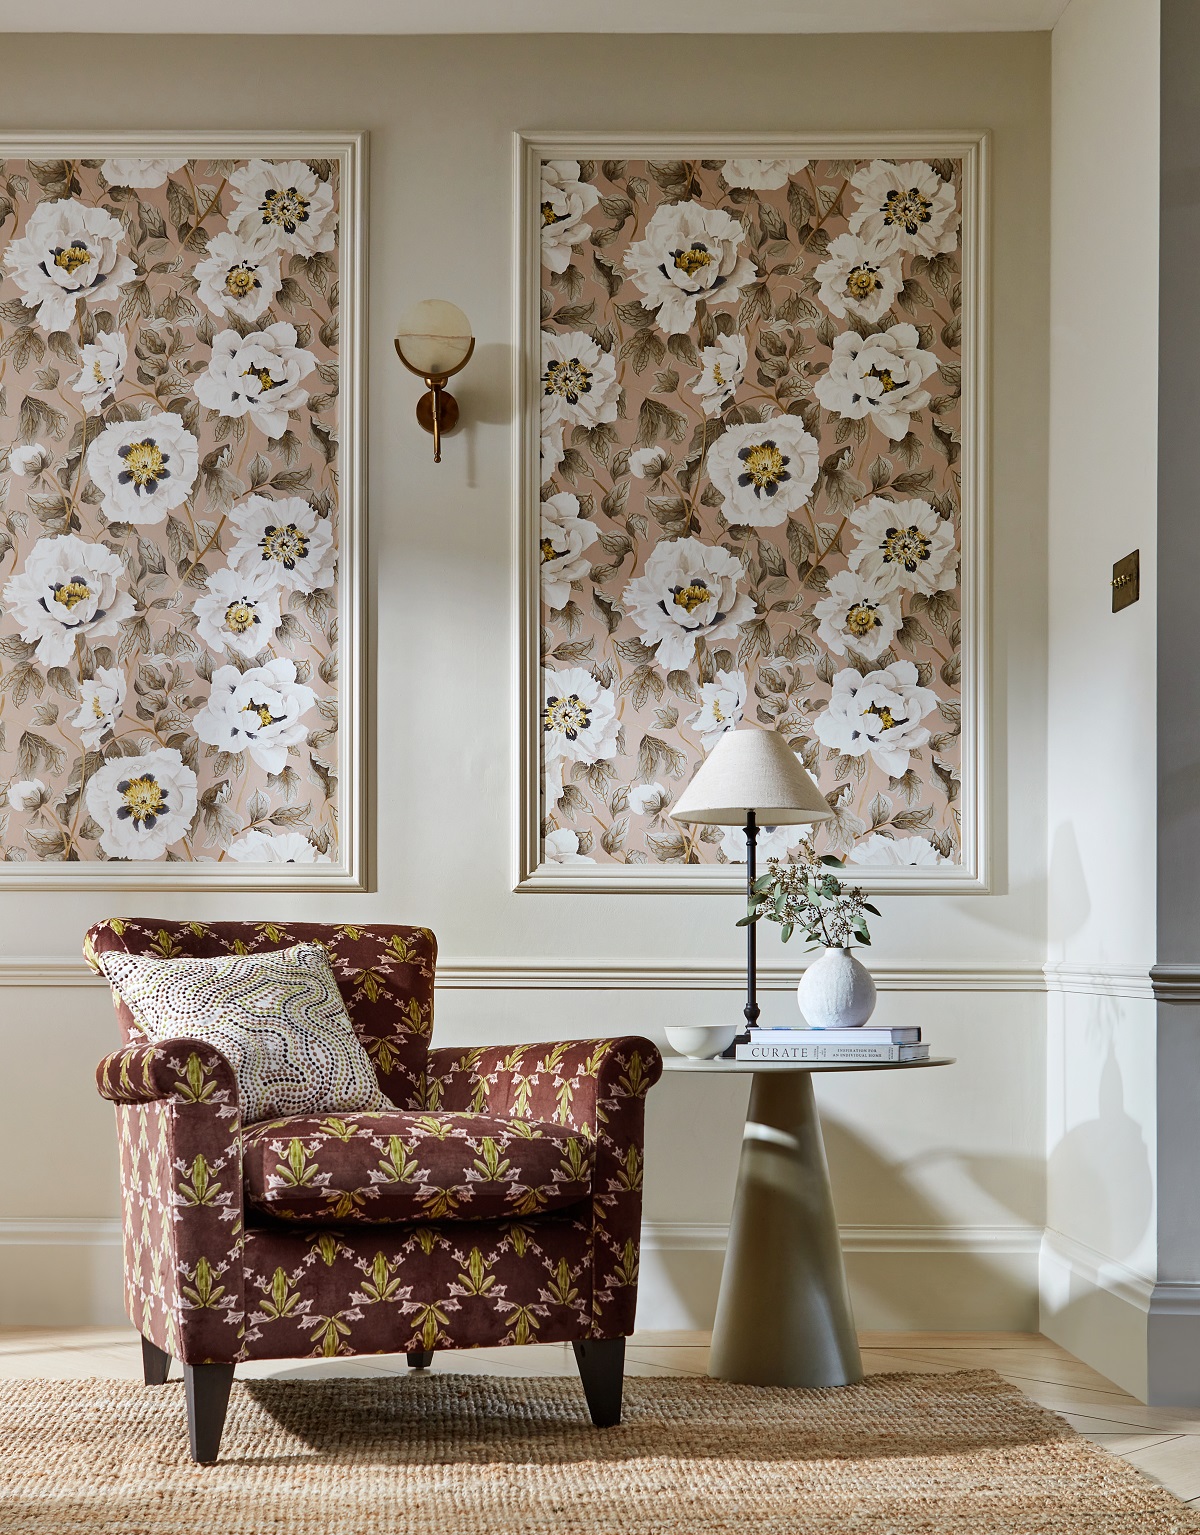 brown floral wallpaper in panels behind brown patterned chair in Harlequin fabric colour 4